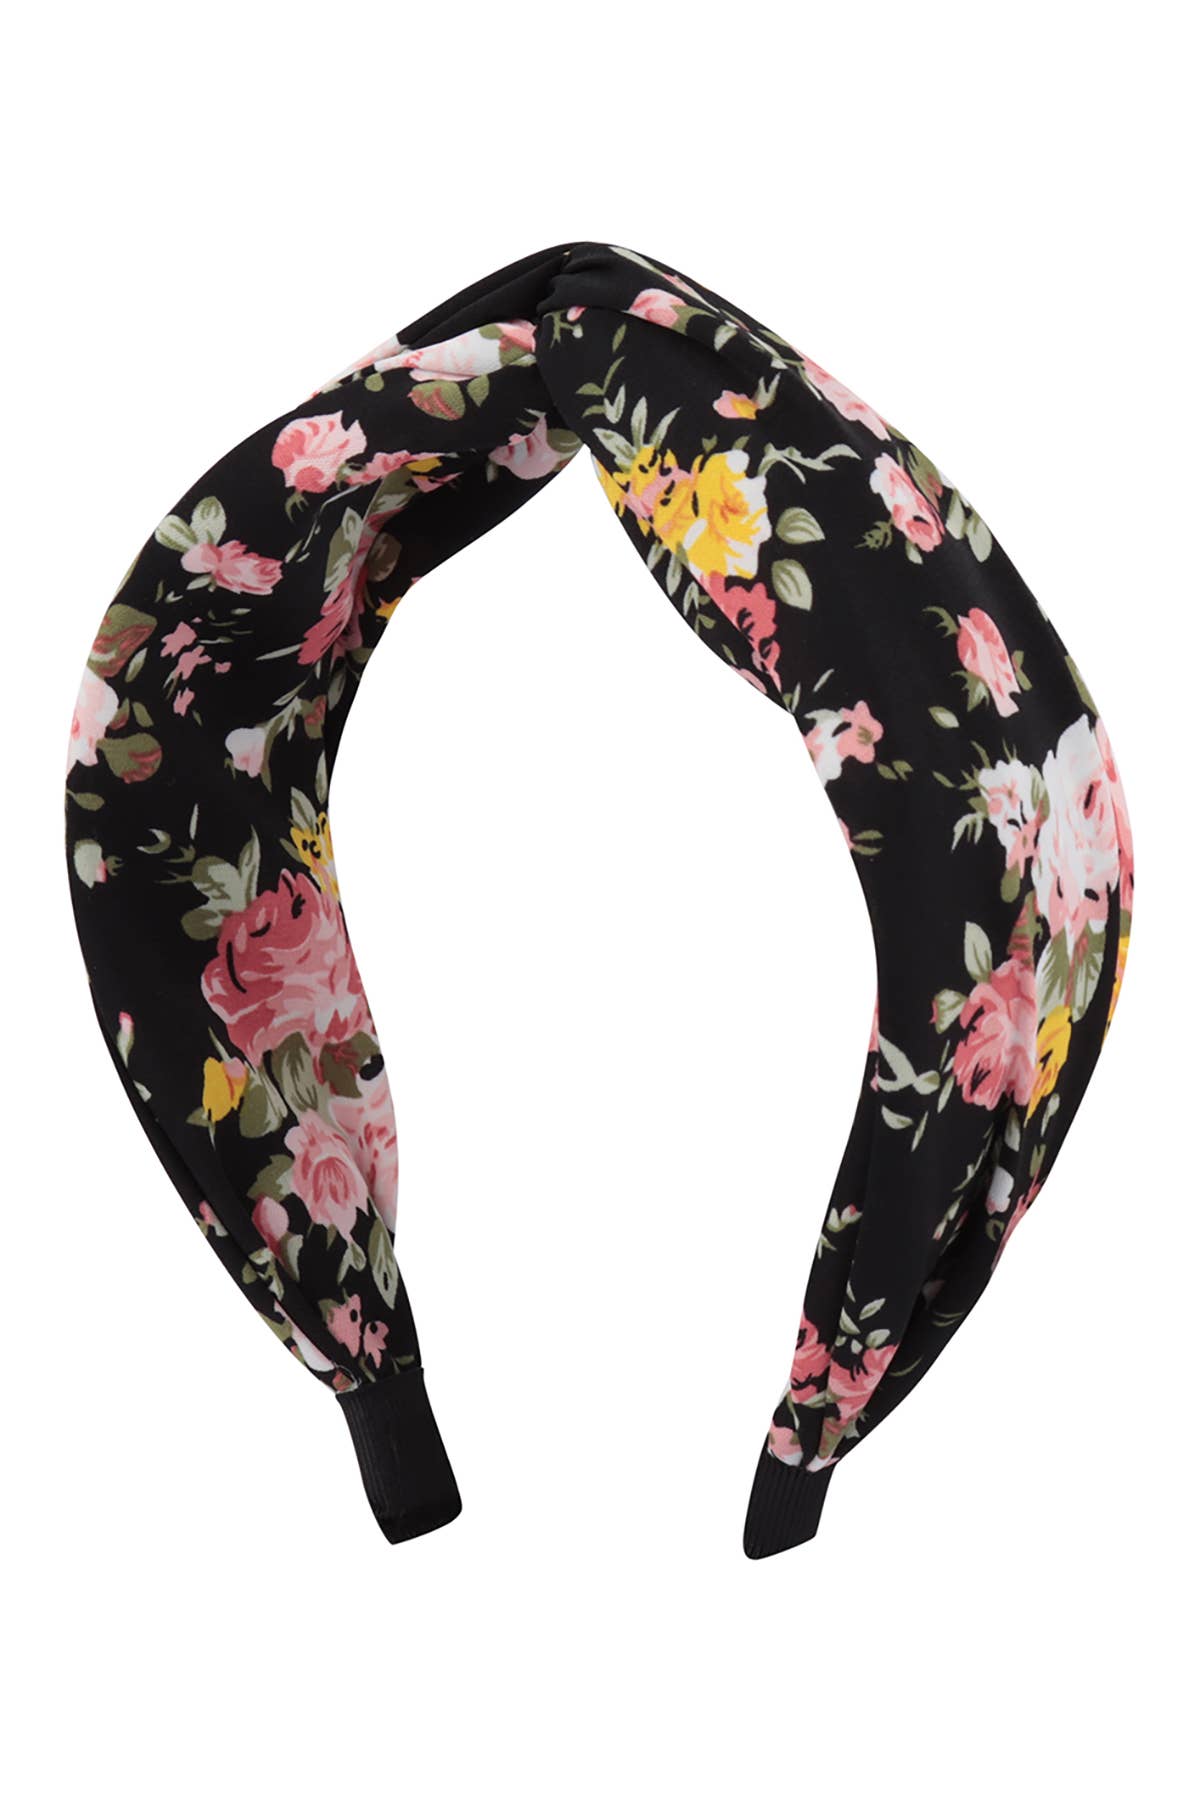 MYS Wholesale Inc - HDH3708-FLOWER PRINT KNOTTED HEADBAND HAIR ACCESSORIES